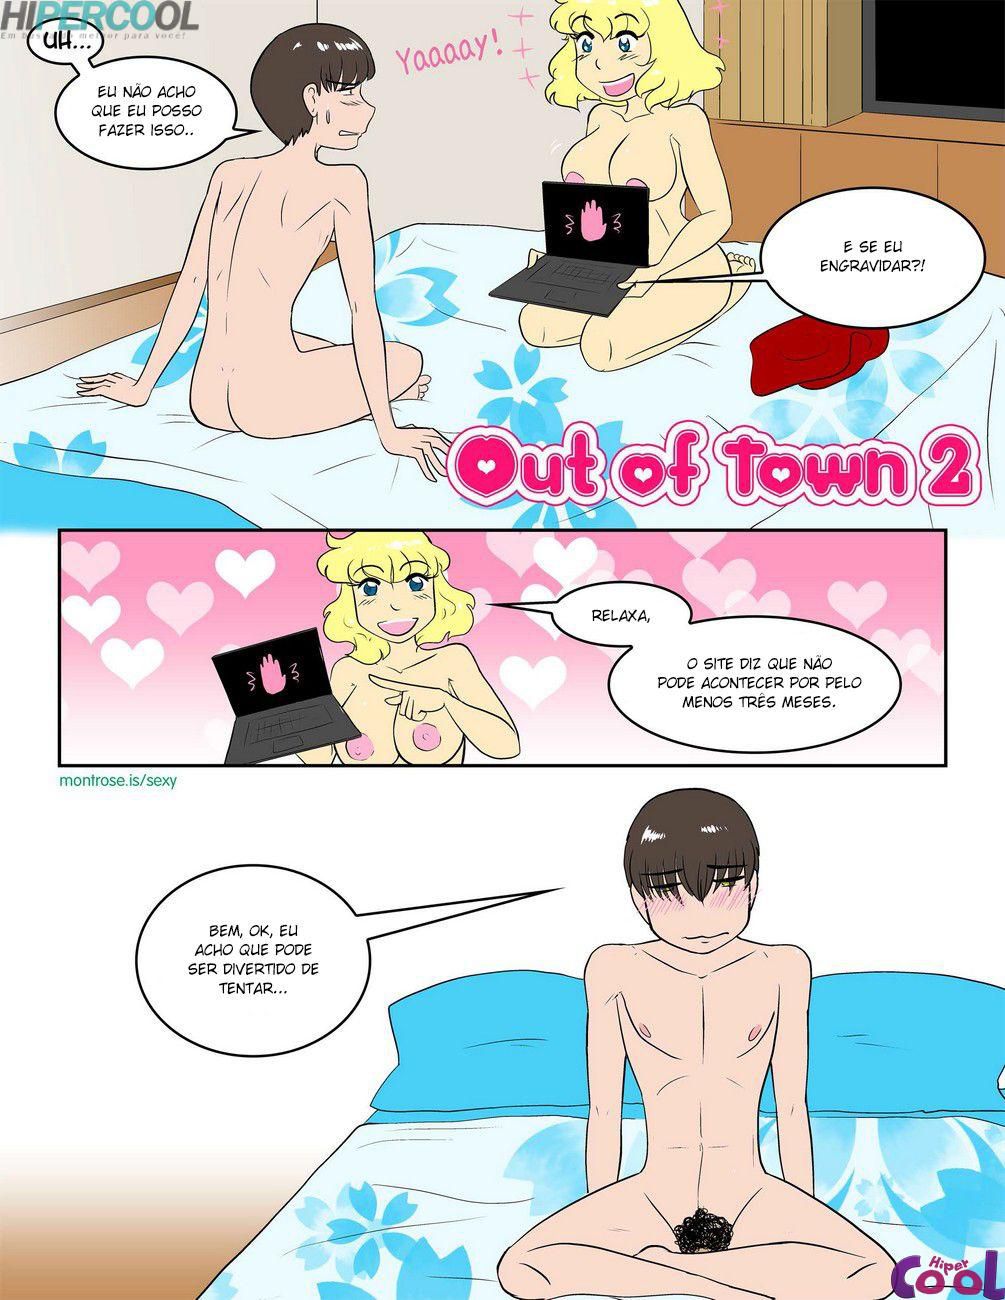 [Kittyhawk] Out of Town 2 [Portuguese-BR] {Hiper.cooL} 1